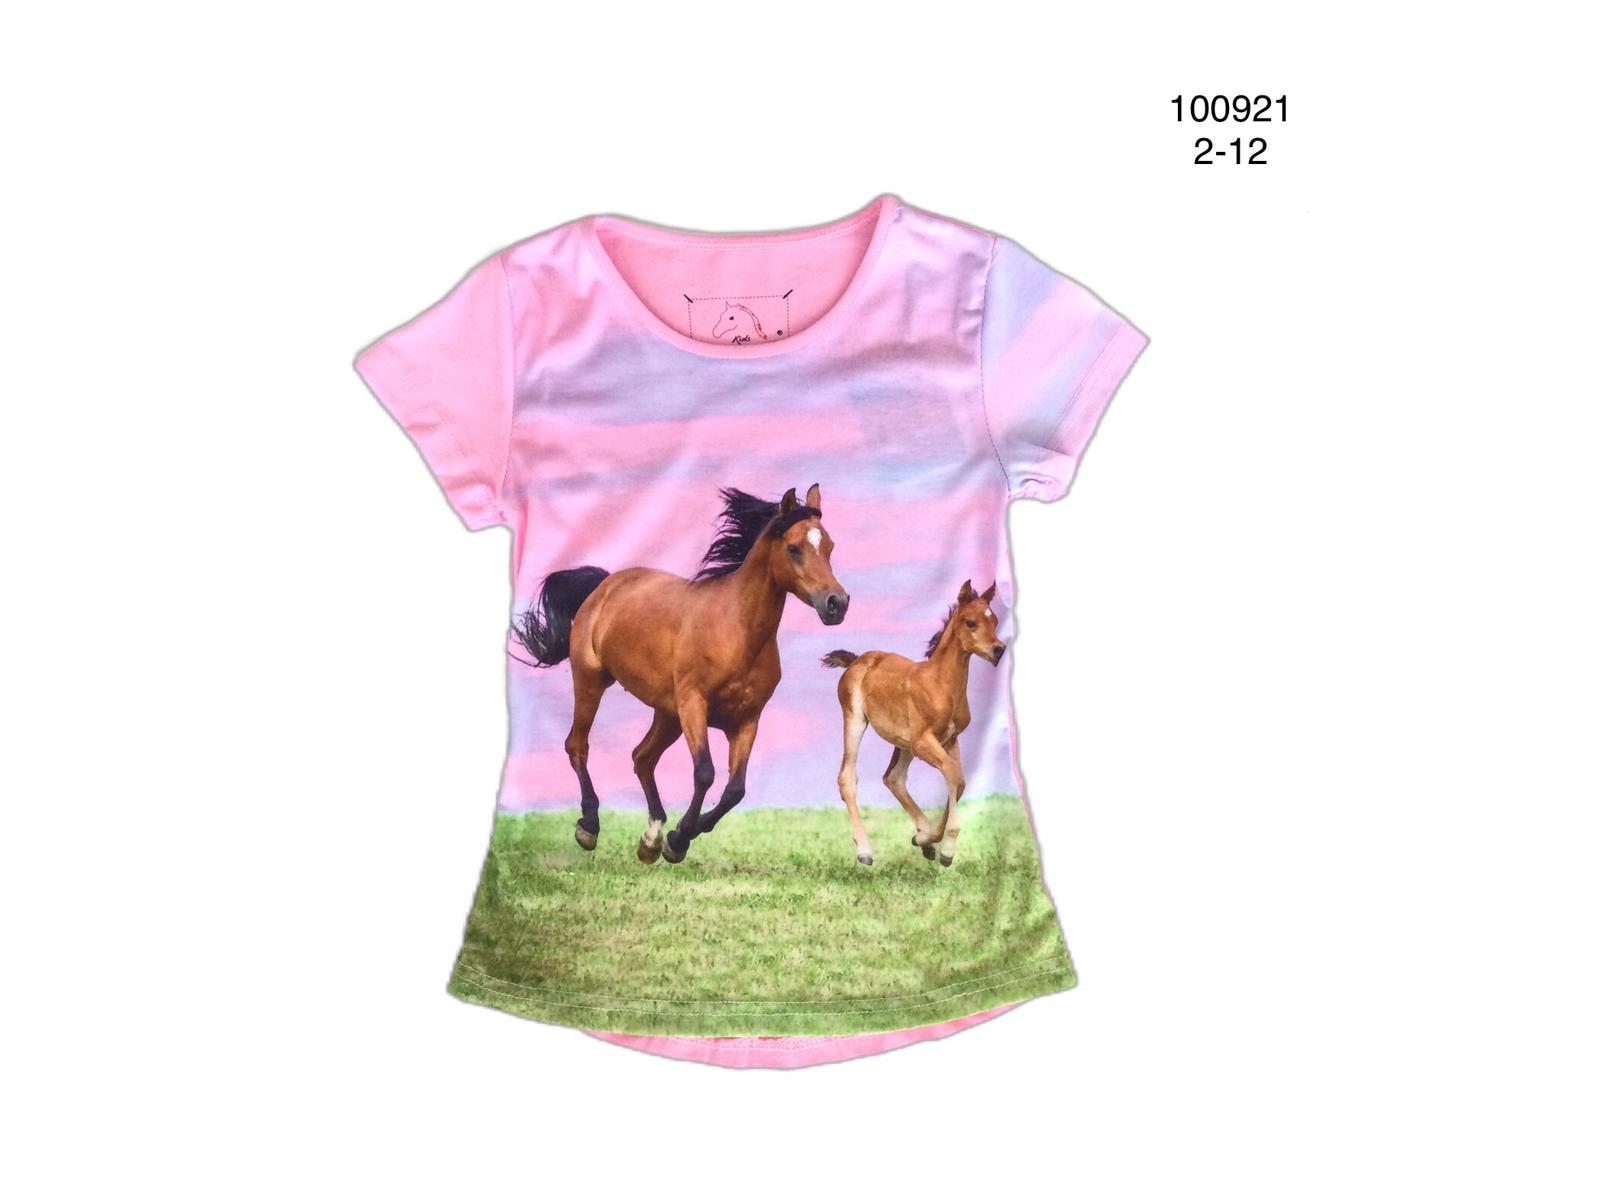 Pink shirt with horse and foal